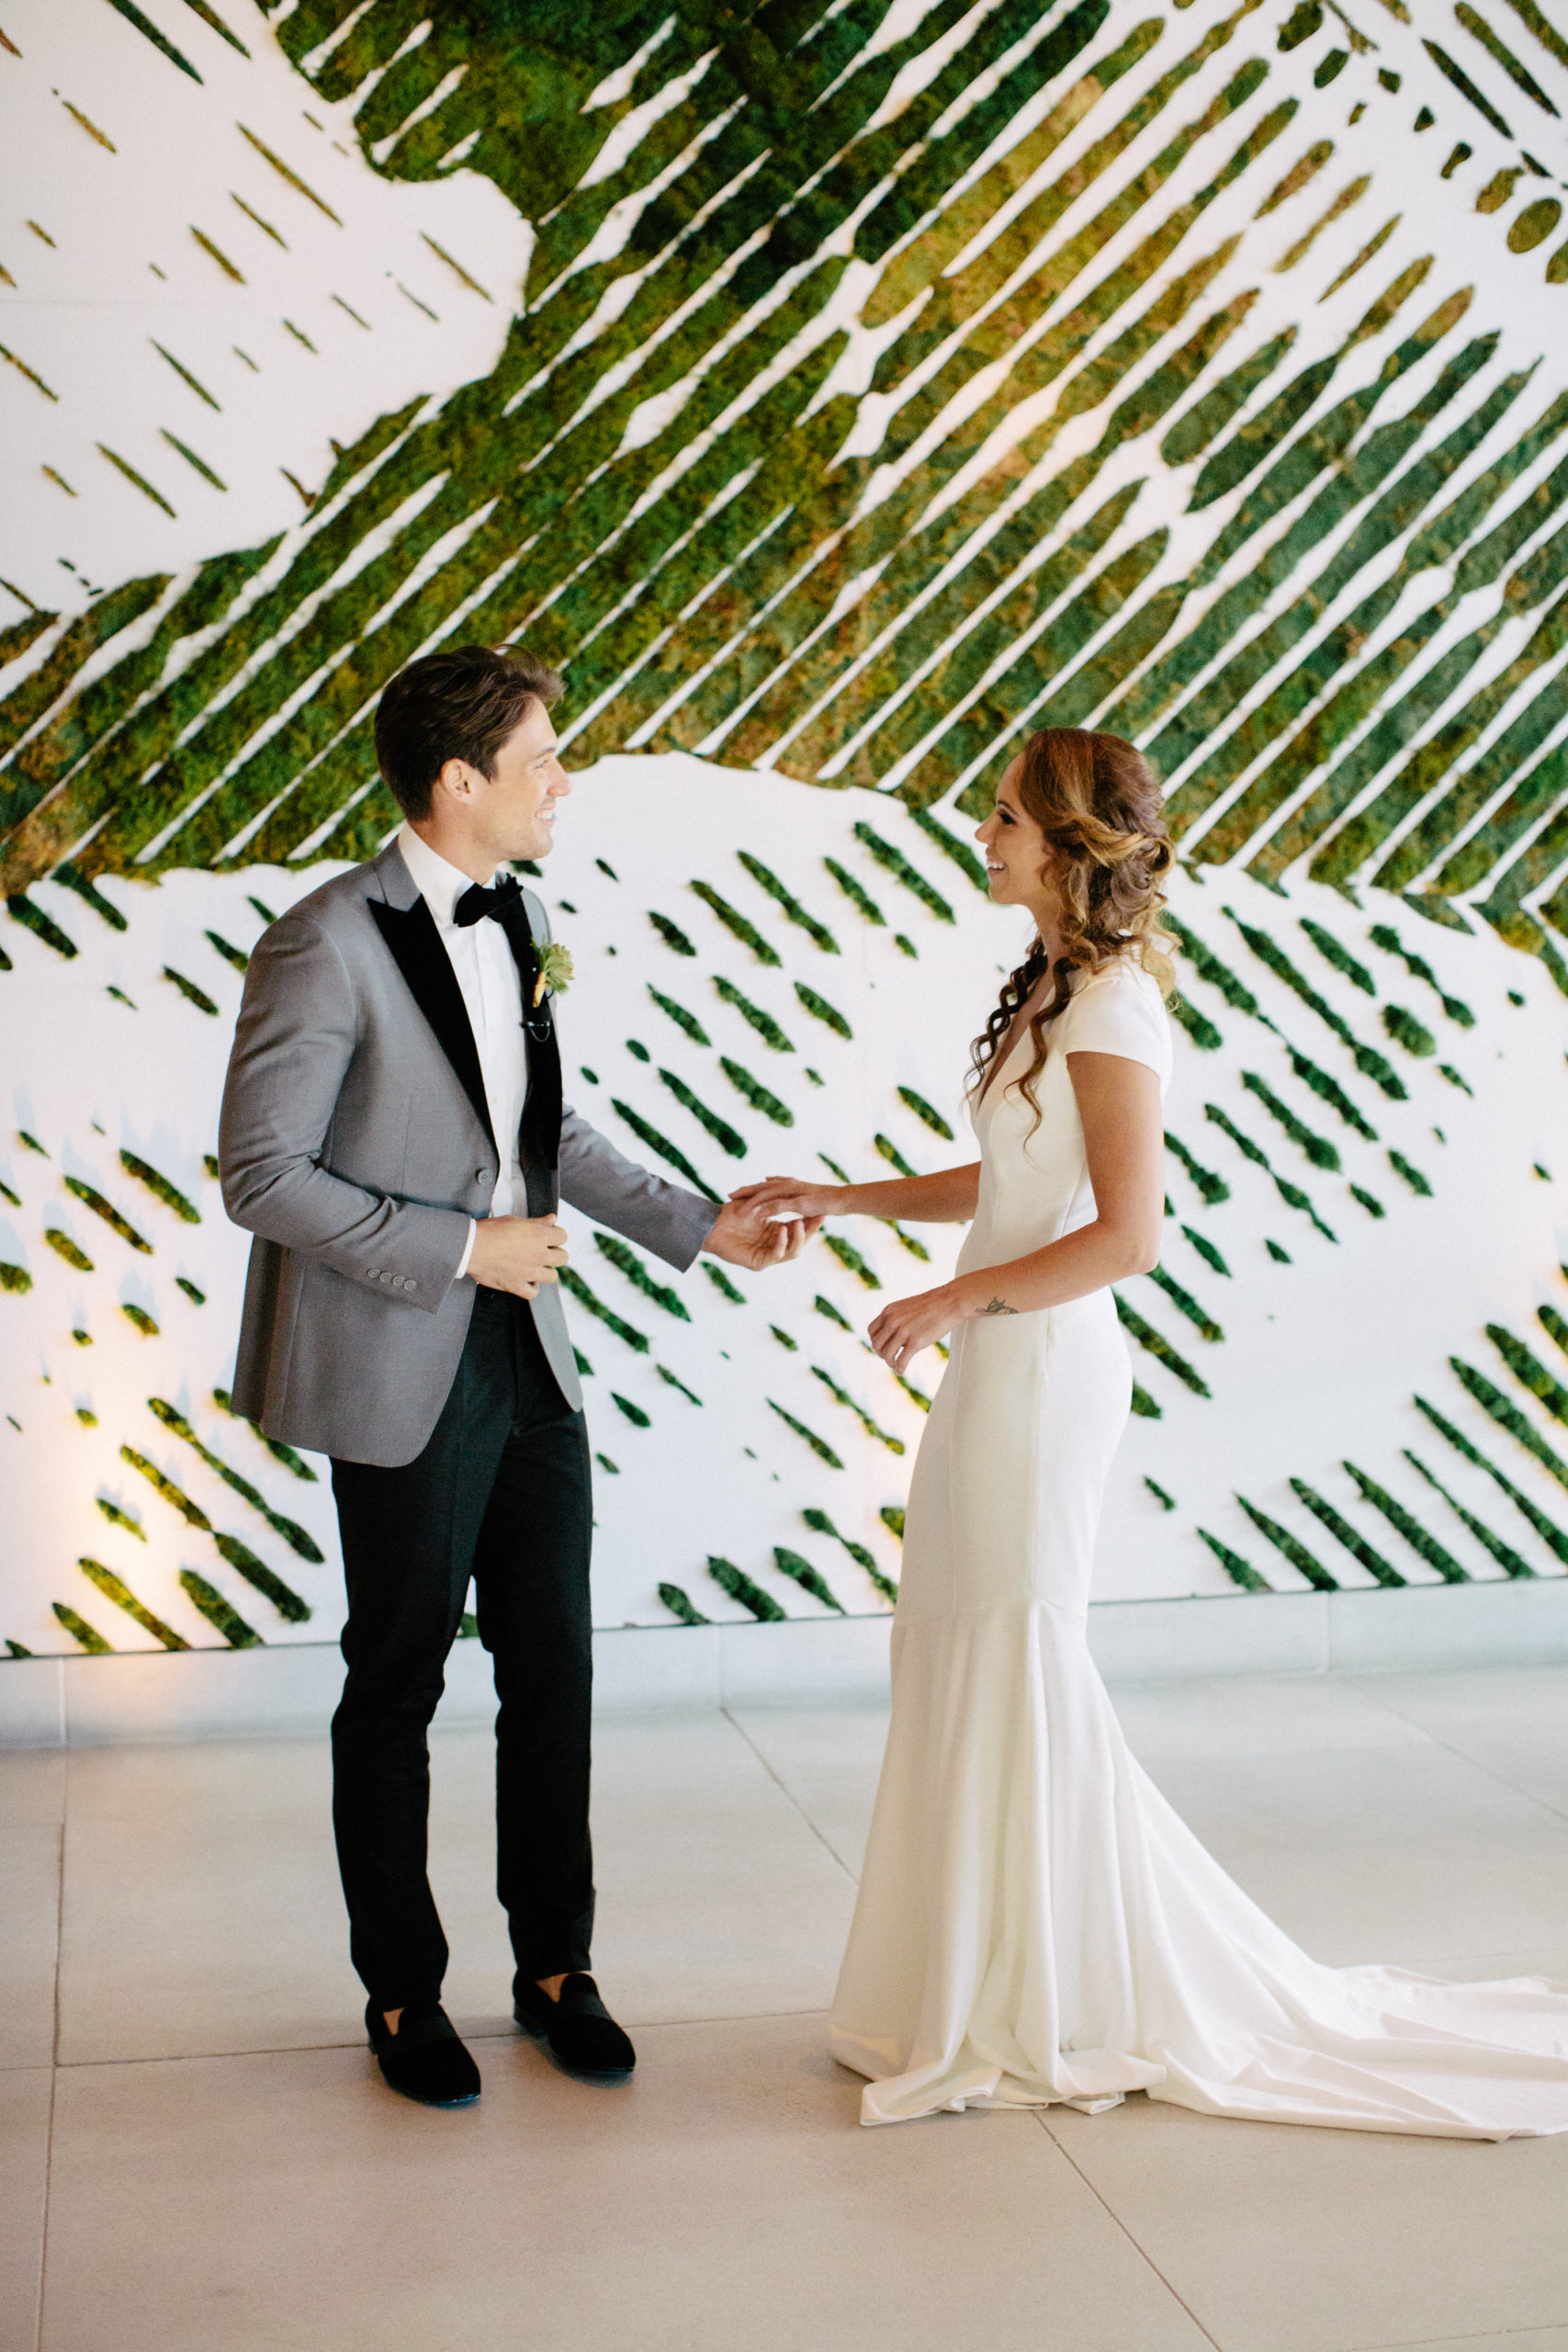 The greenery wall in the lobby of the 1 Hotel South Beach provides a one-of-a-kind backdrop for your first look wedding photos!